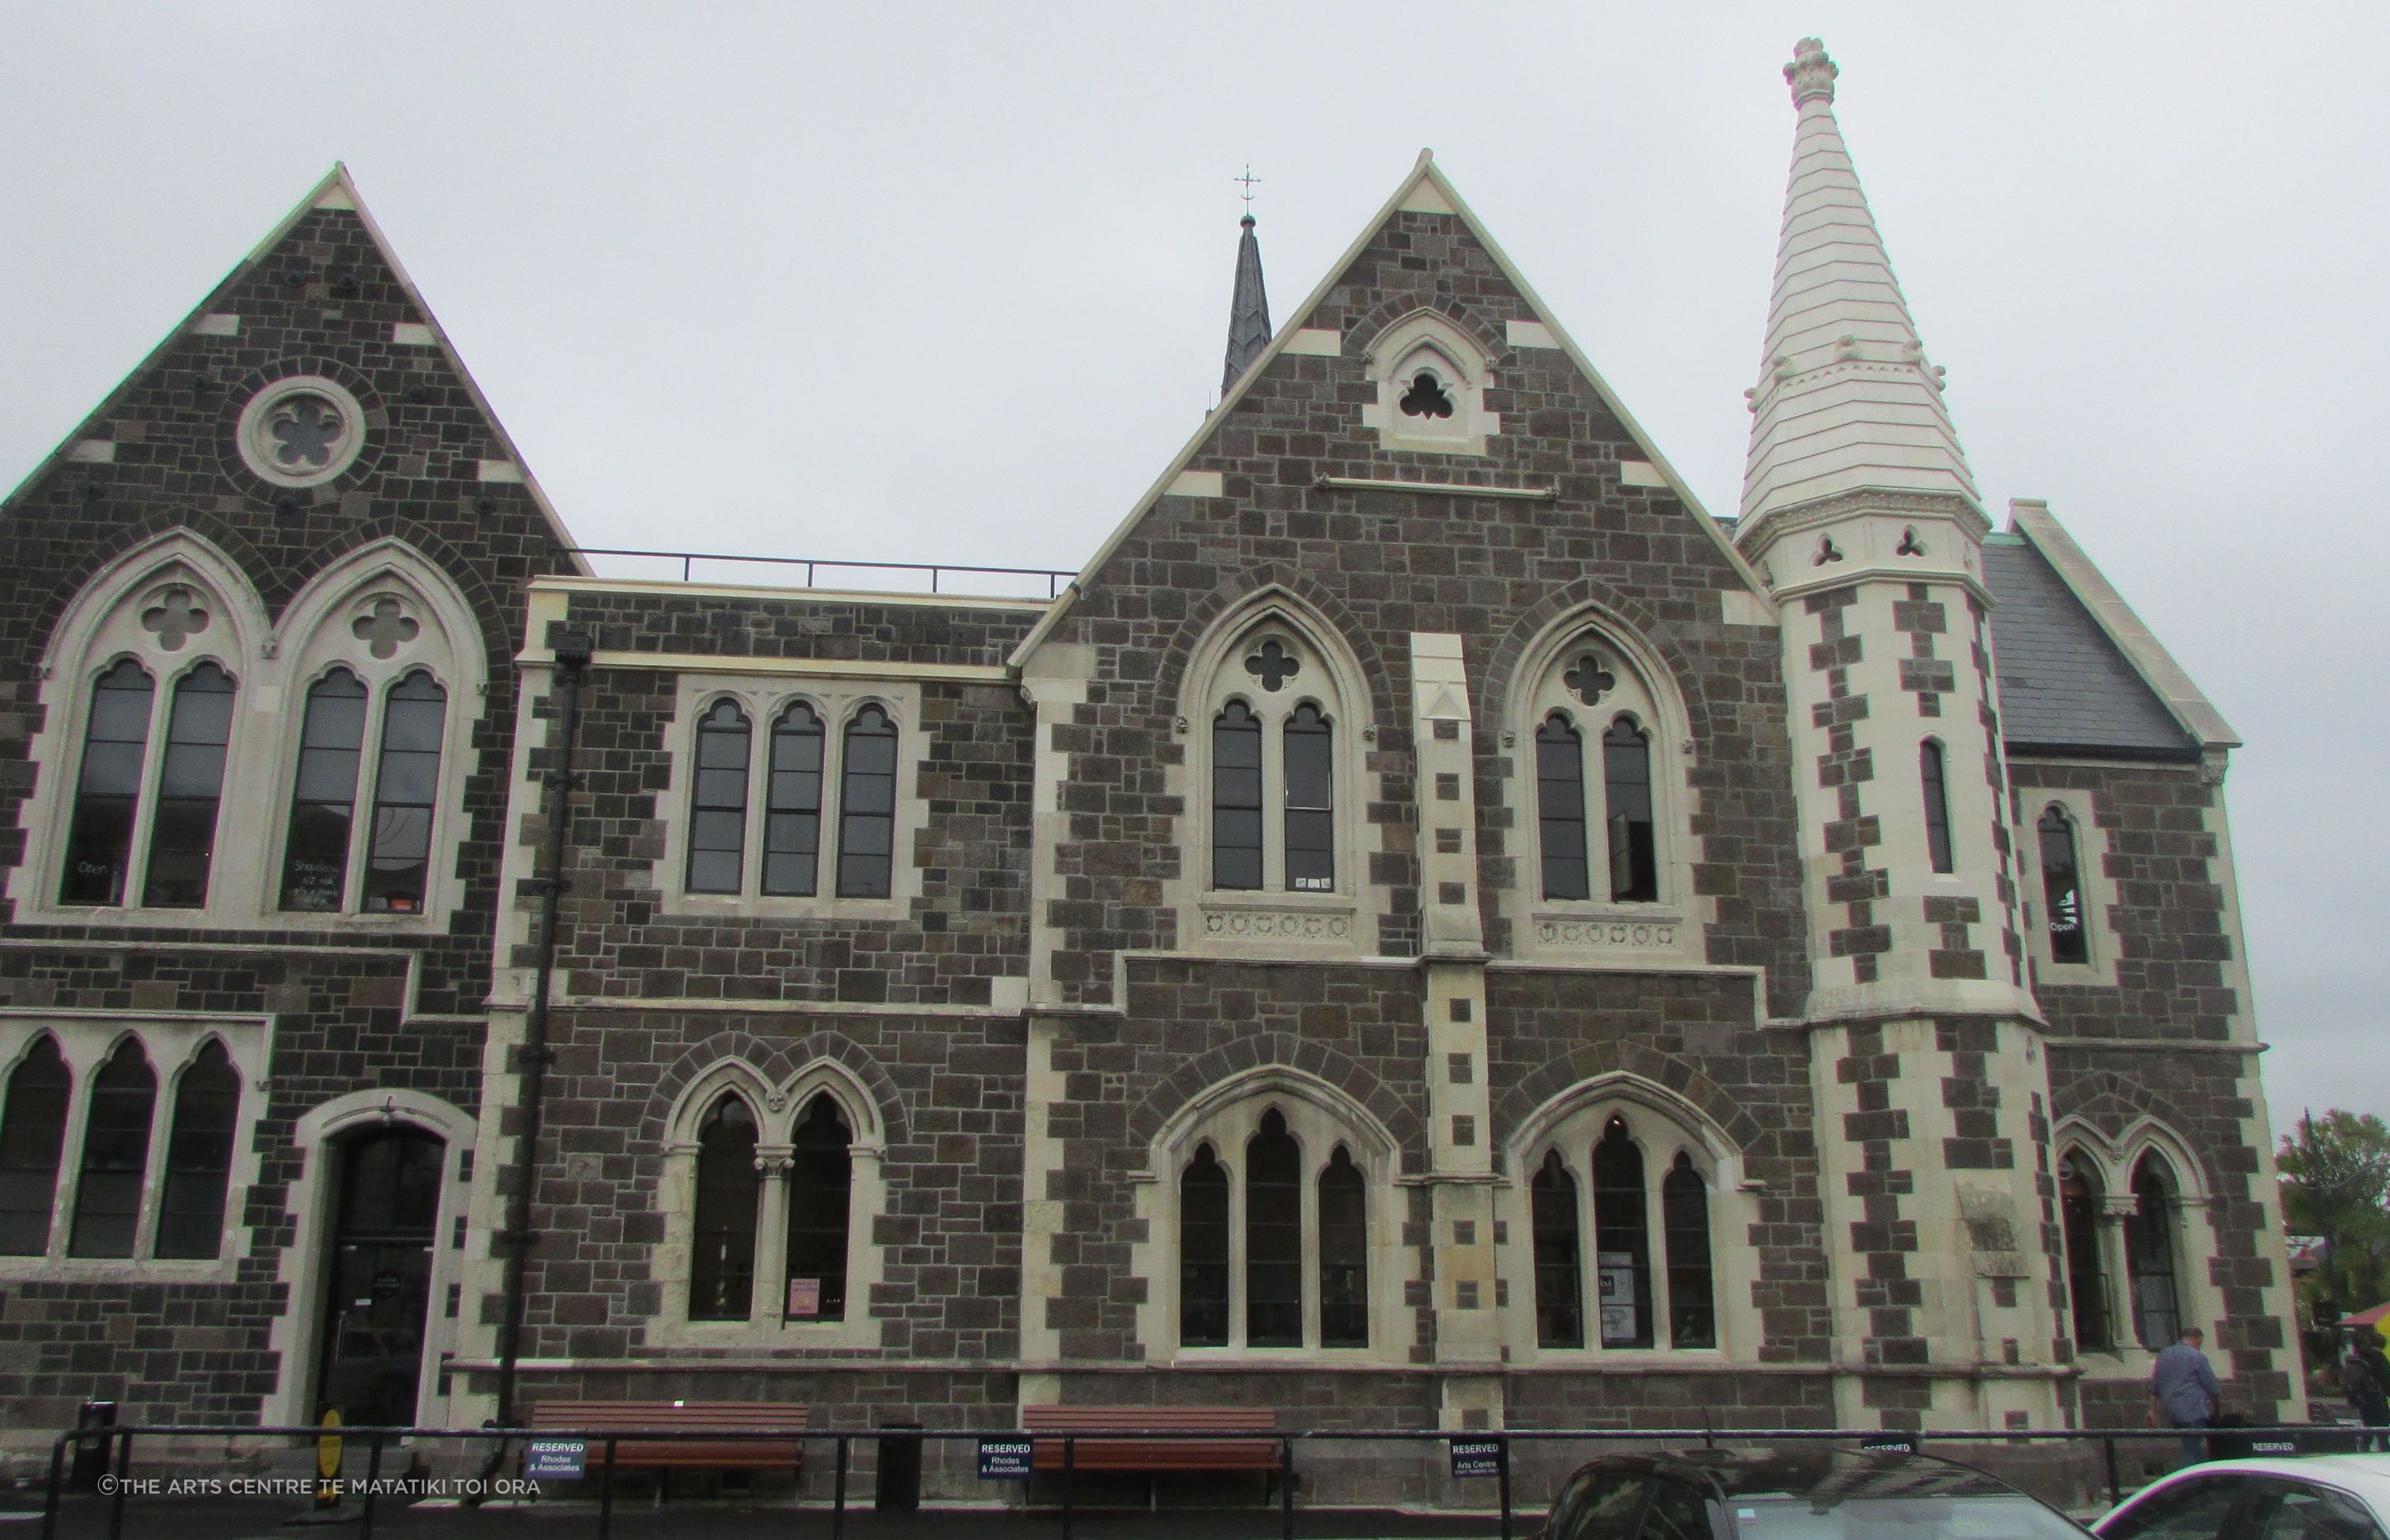 The Arts Centre Te Matatiki Toi Ora is a Gothic Revival-style series of buildings, the first of which opened in 1878 as Christchurch Girls' High School. The buildings are constructed from basalt and feature limestone facings.